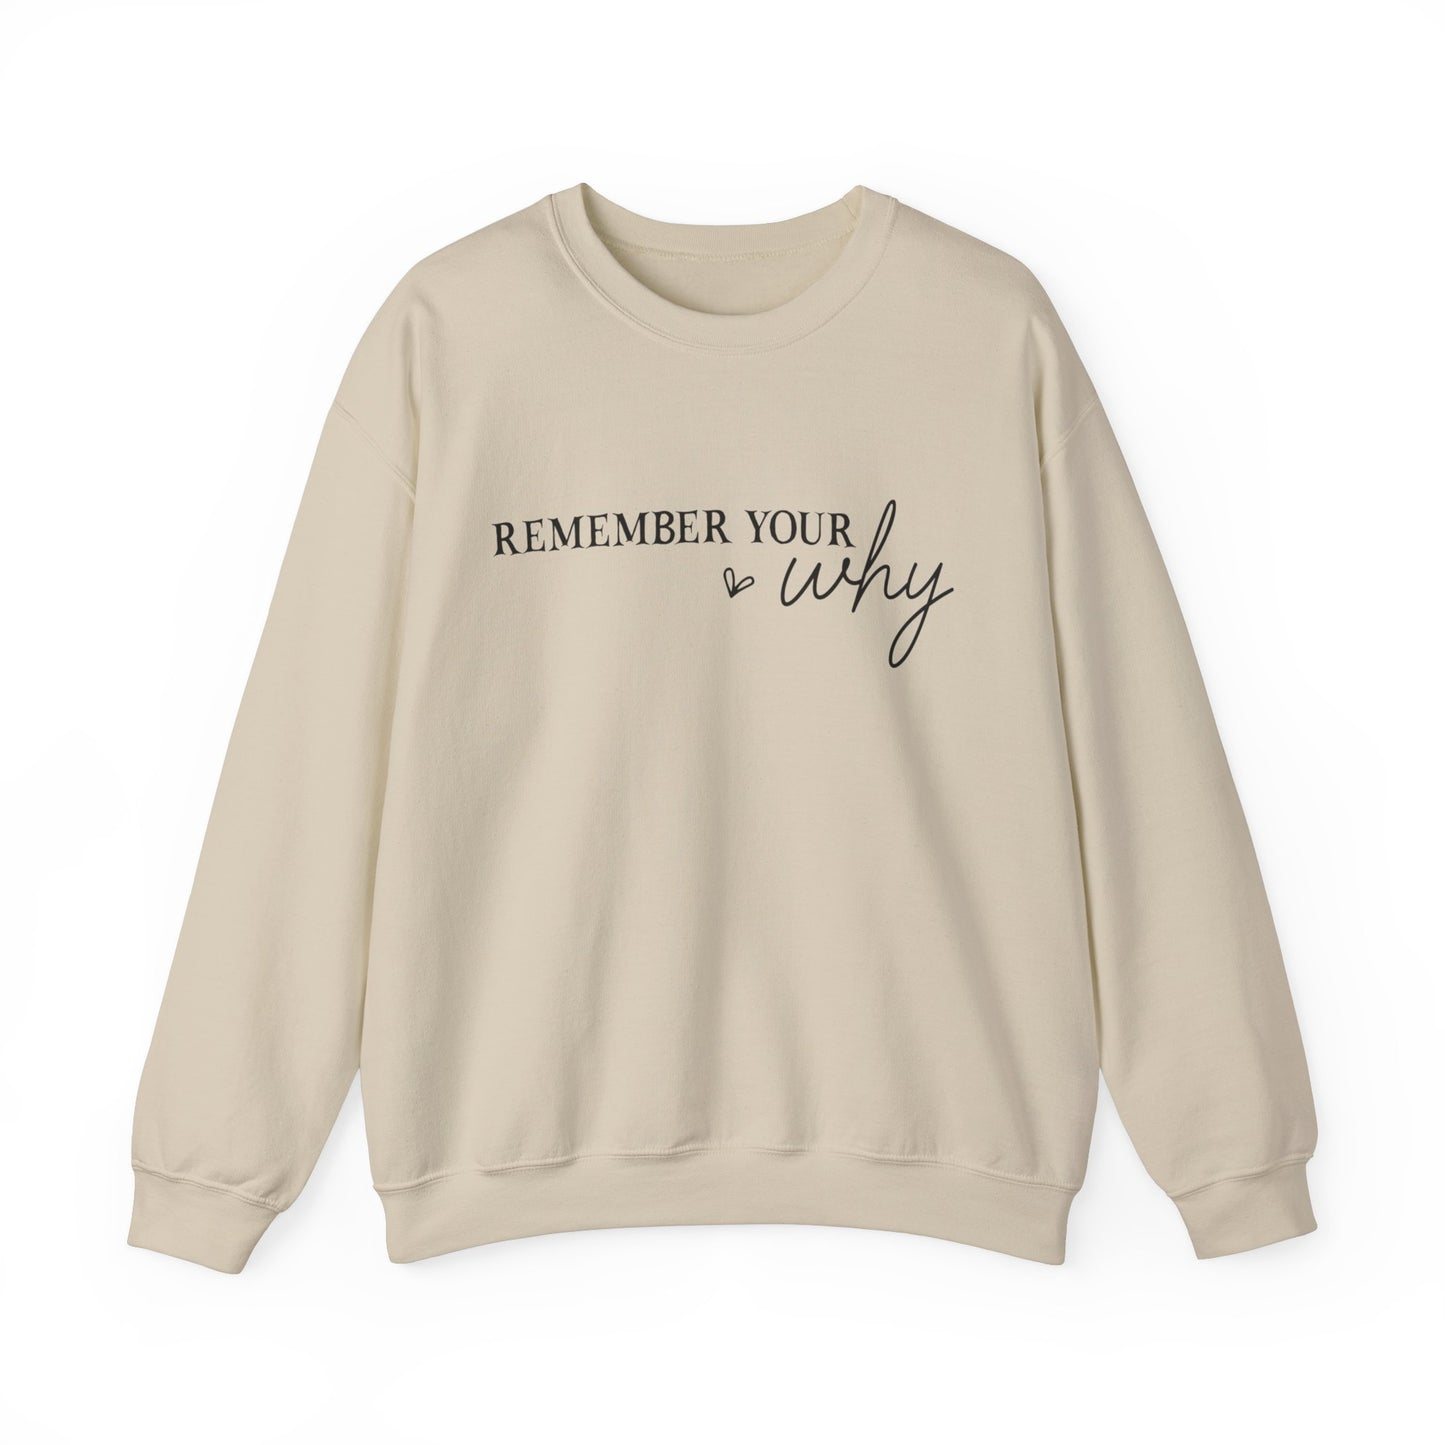 Remember Your Why Women's Sweatshirt